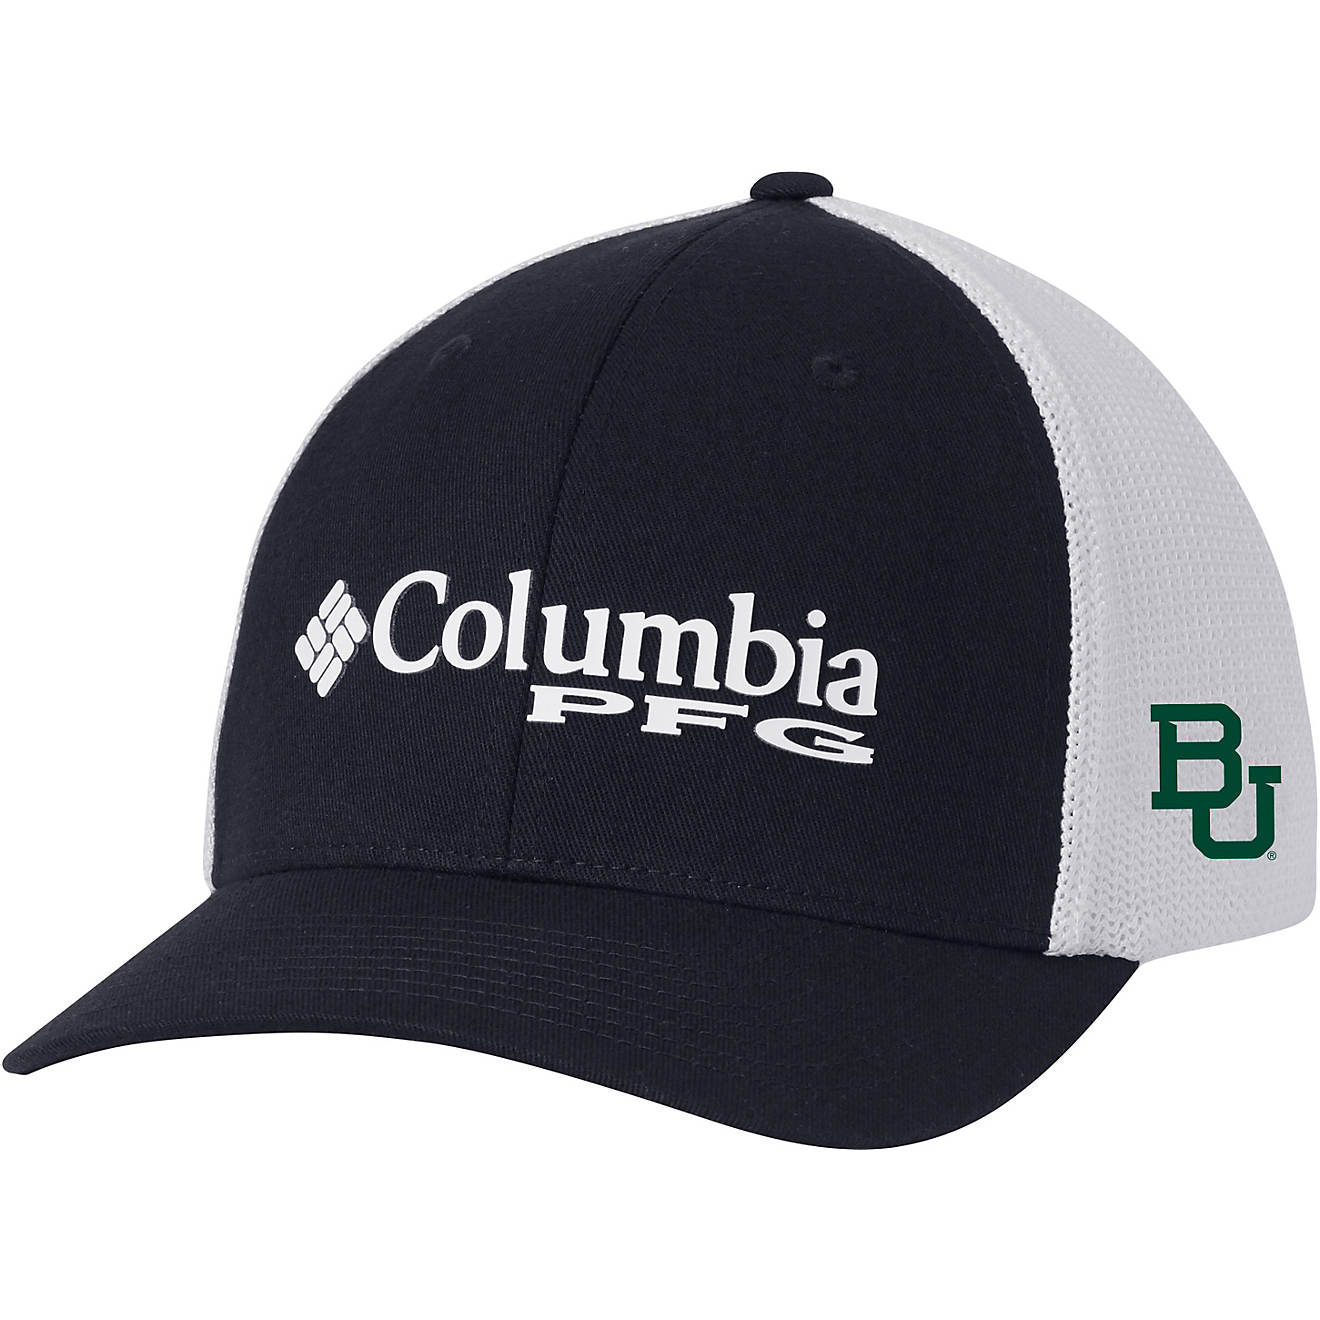 Columbia Sportswear Men's Baylor University PFG Mesh Fitted Ball Cap                                                             - view number 1